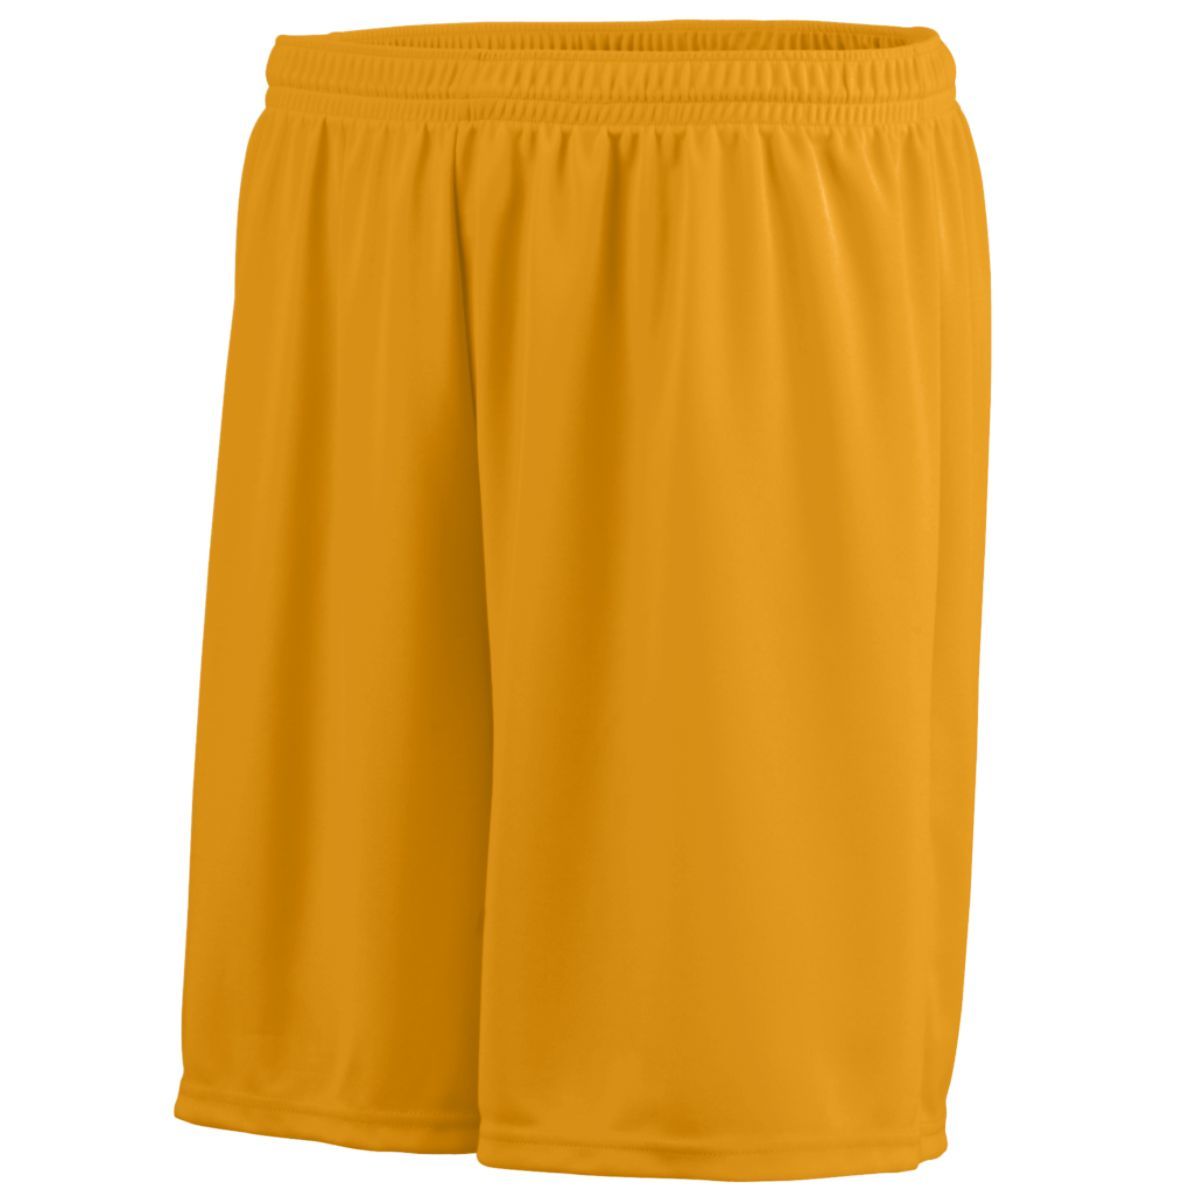 Augusta Sportswear Octane Shorts in Gold  -Part of the Adult, Adult-Shorts, Augusta-Products product lines at KanaleyCreations.com